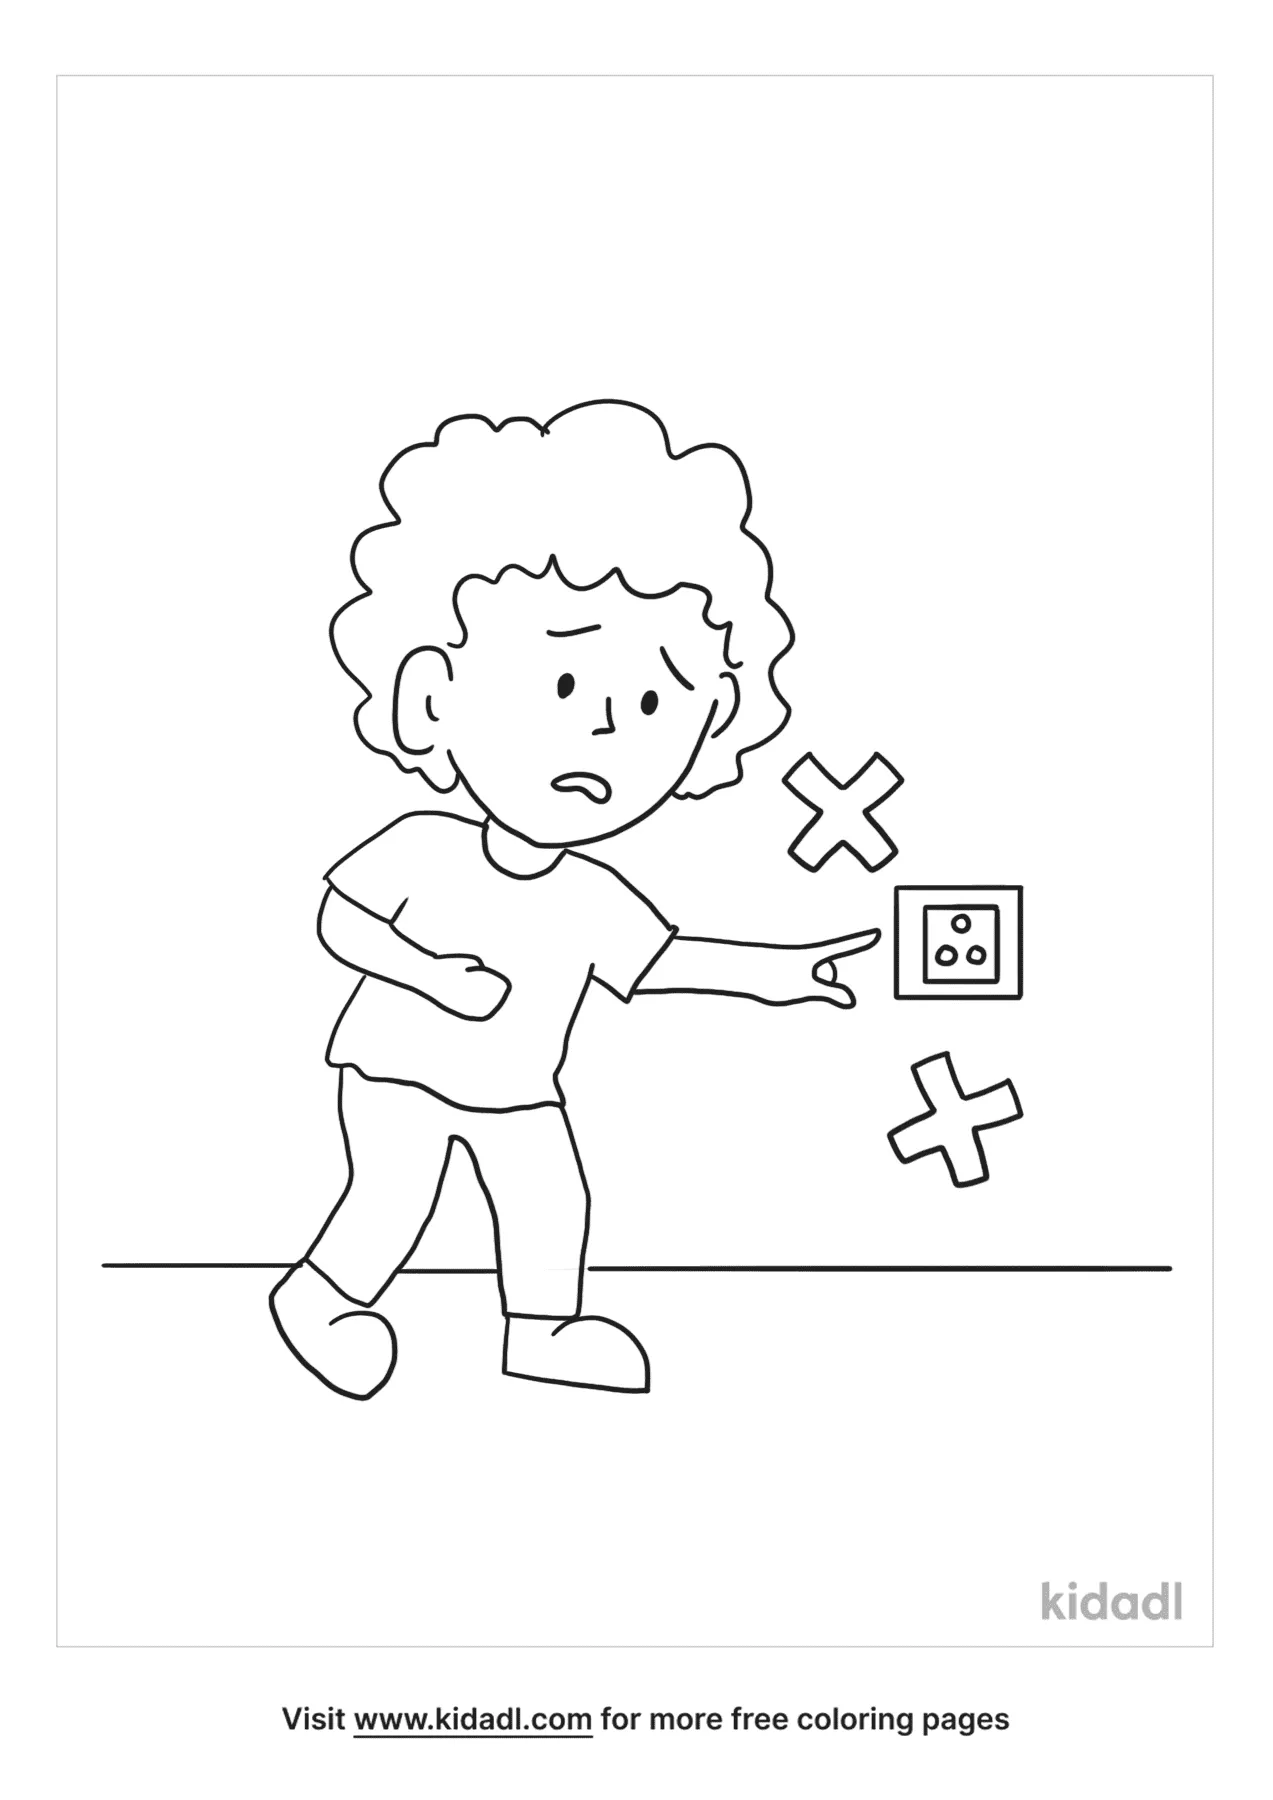 Electric Coloring Pages